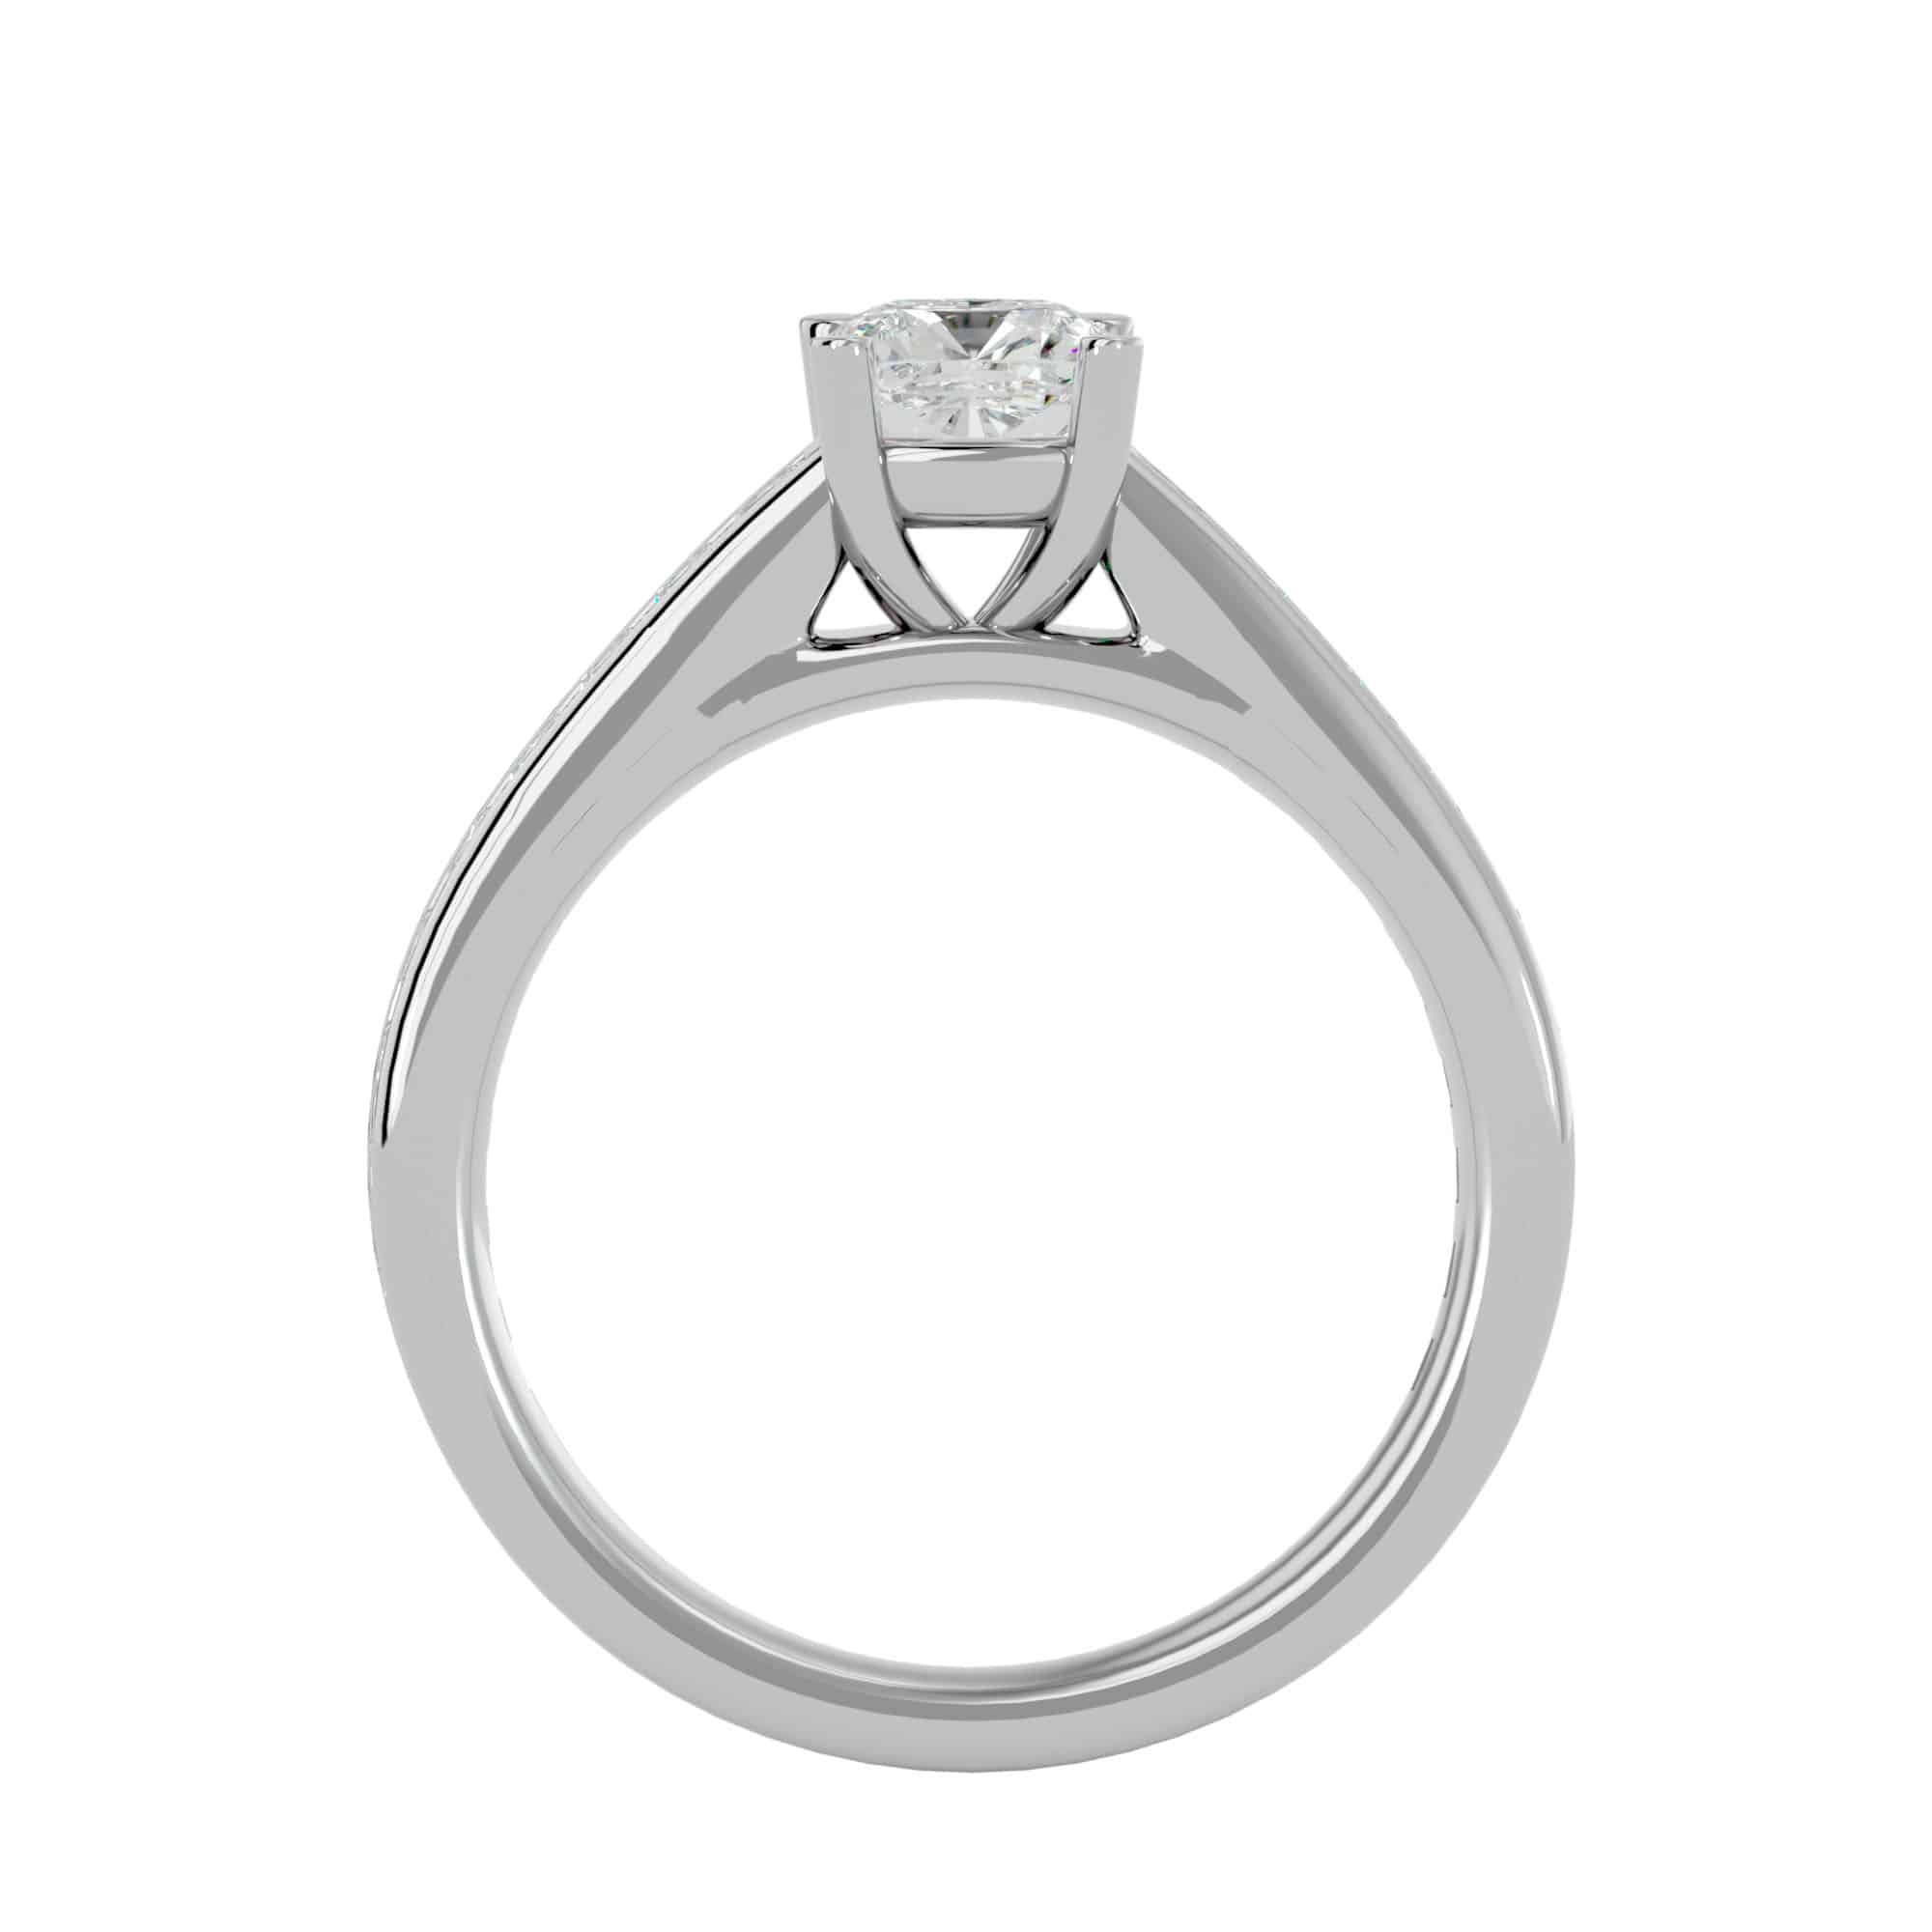 Cushion Cut Solitaire Diamond Engagement Ring Cathedral Band Setting